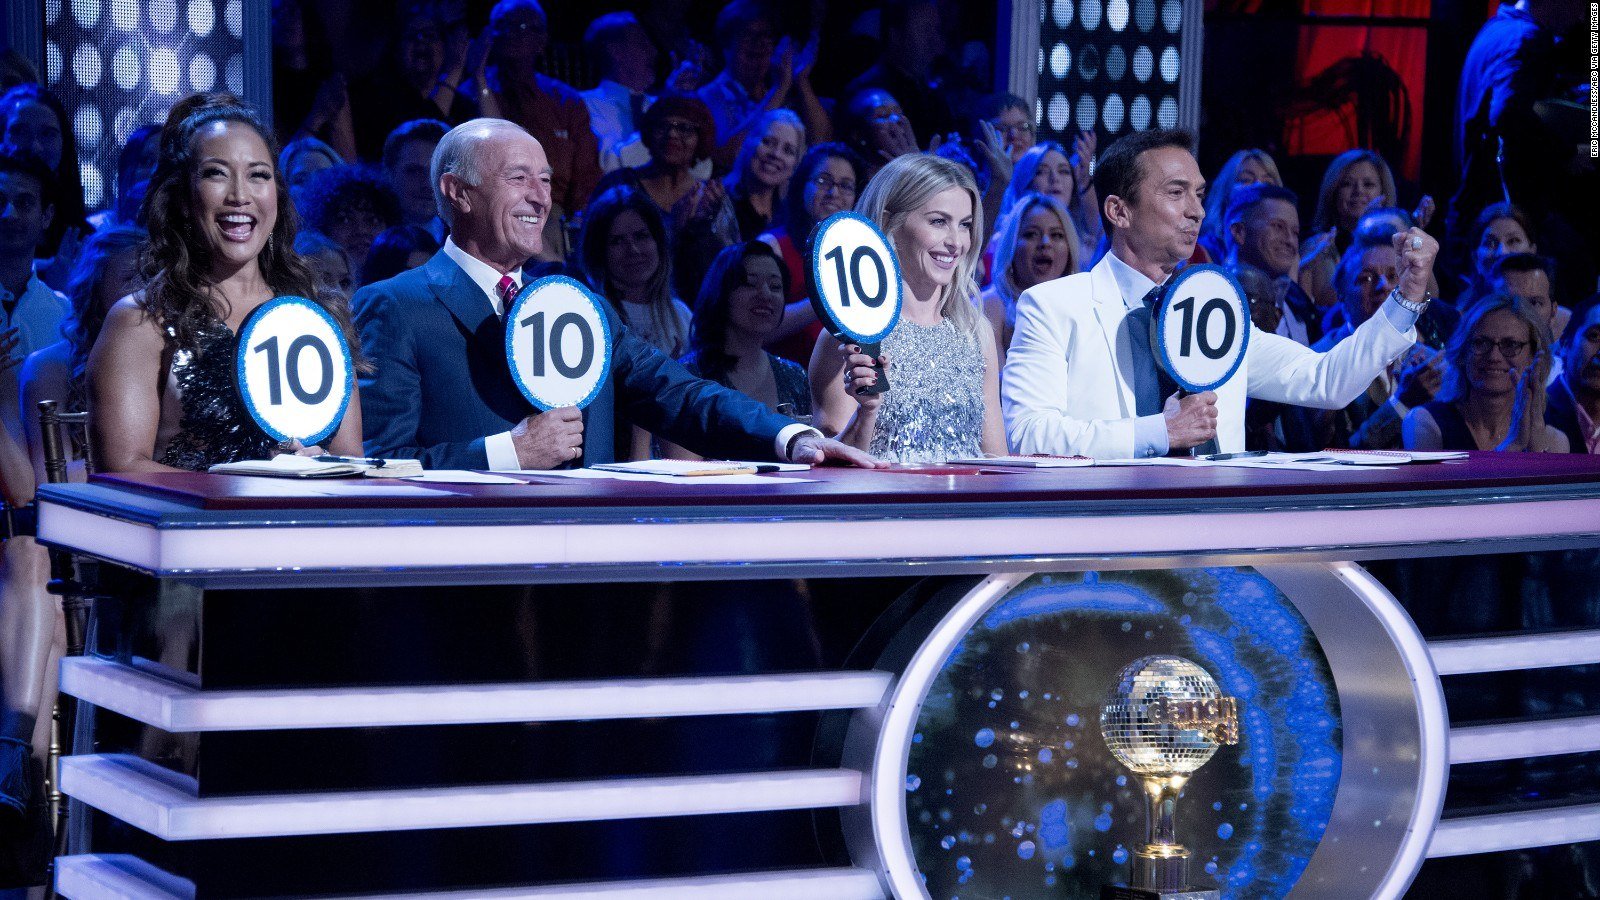 Carrie Ann Inaba, Len Goodman, Julianne Hough, and Bruno Tunioli hold up 10 signs on DWTS 